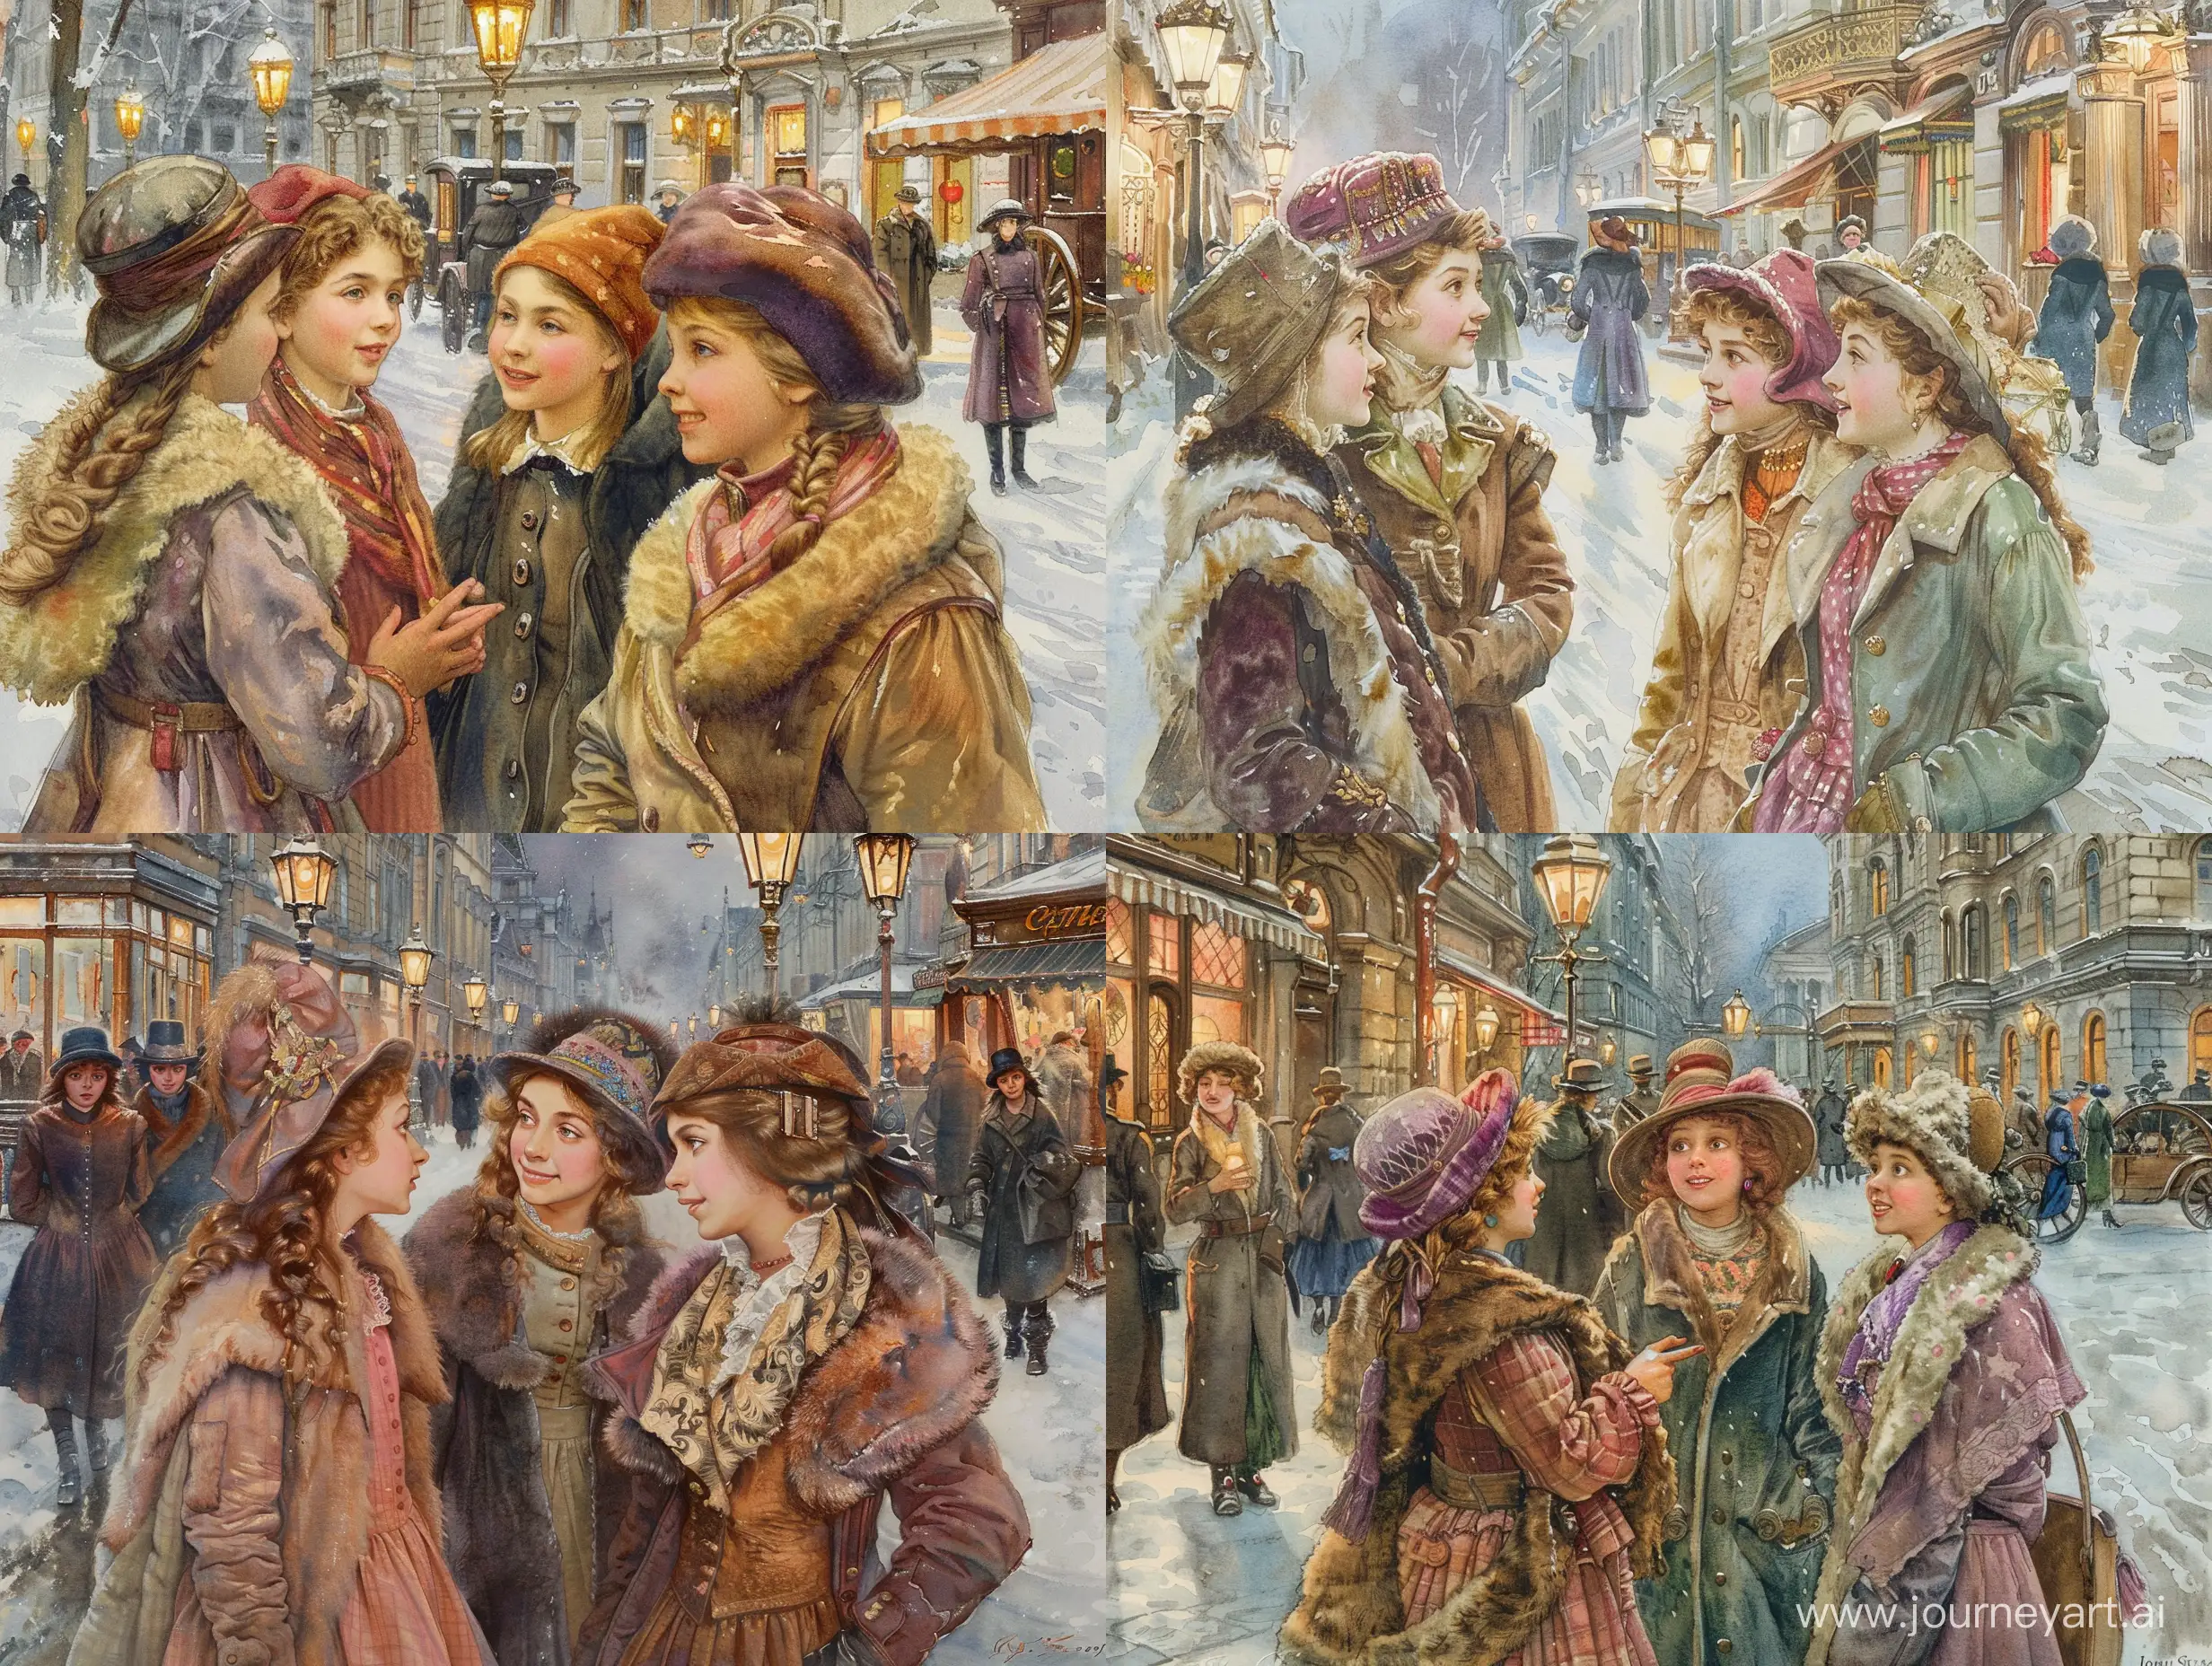 Stylish-Young-Women-Enjoy-a-Winter-Stroll-in-Historic-St-Petersburg